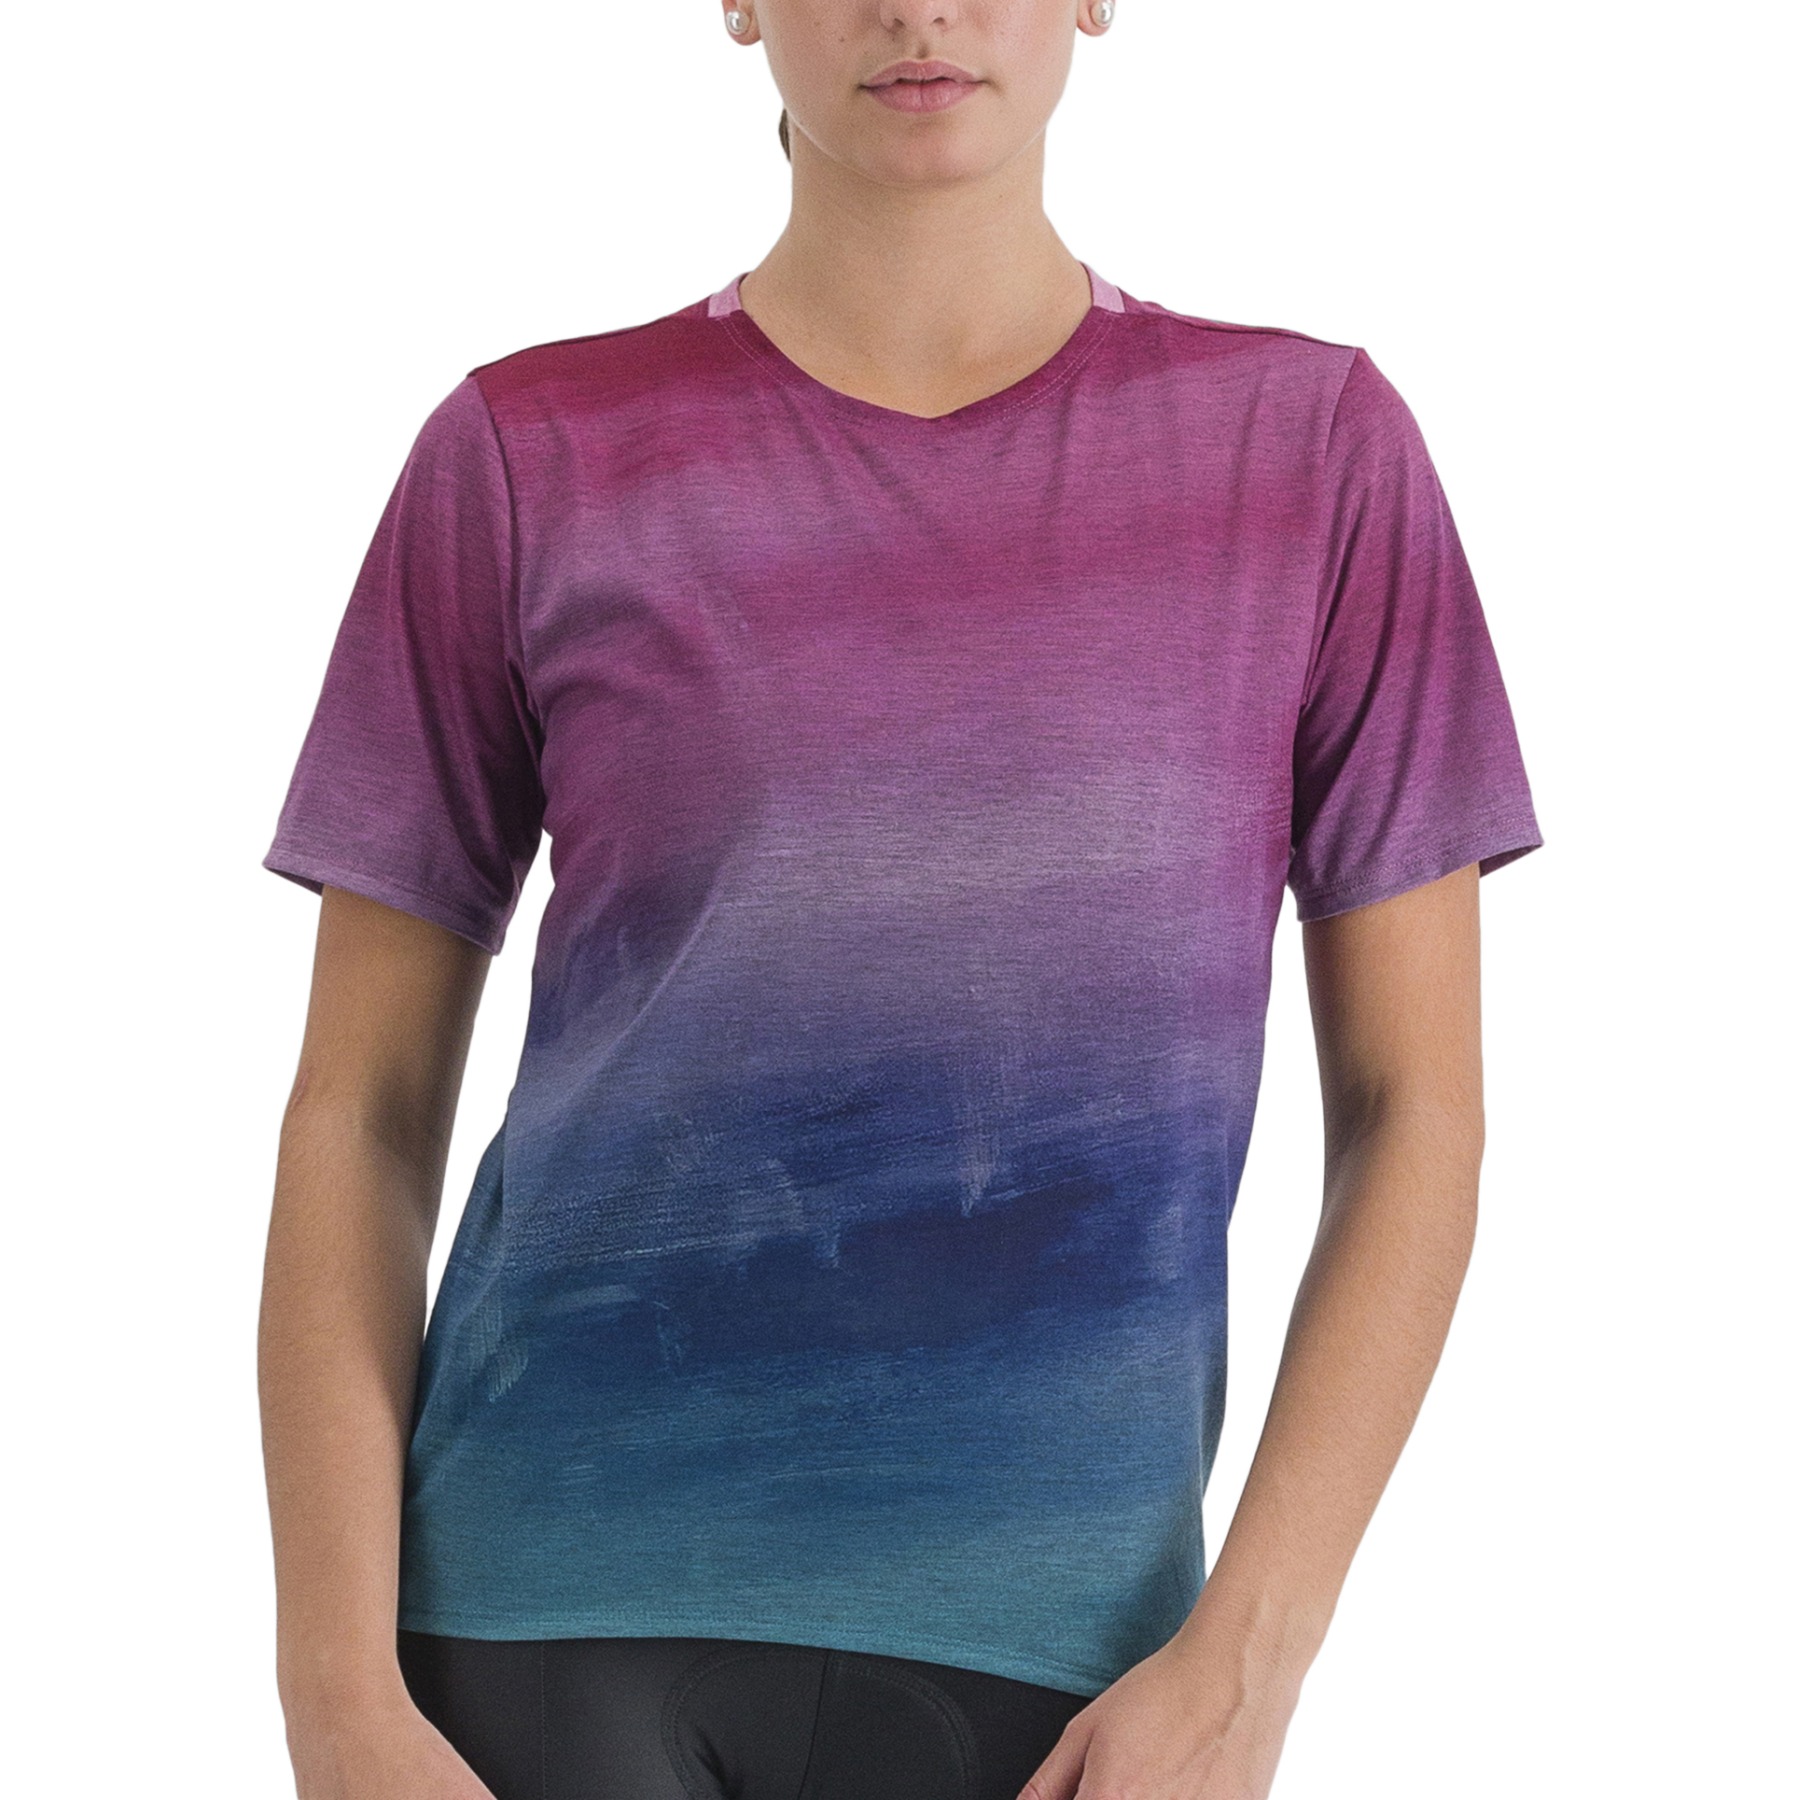 Picture of Sportful Flow Giara Women Tee - 002 Berry Blue Pink